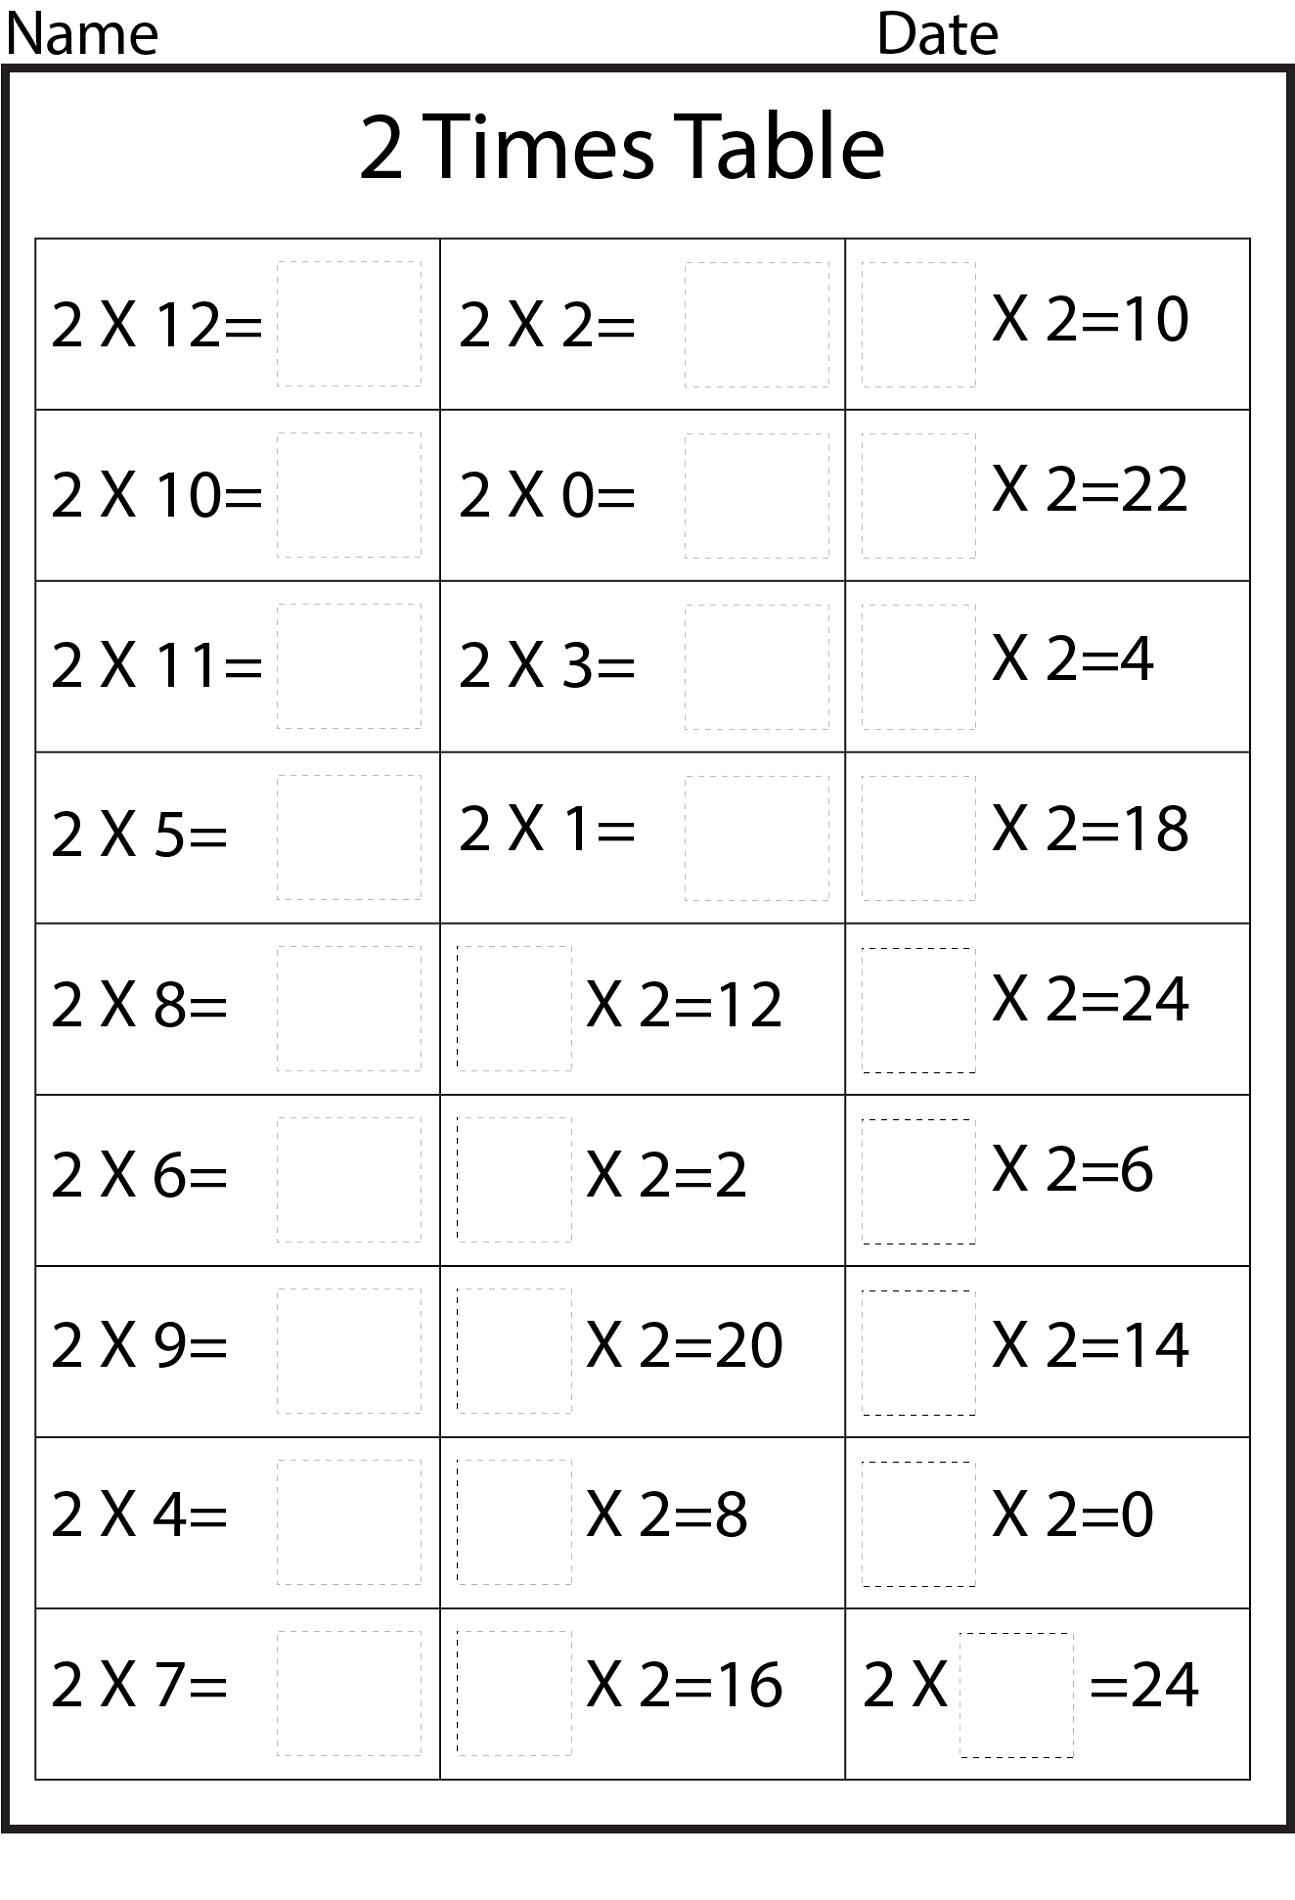 2 times table worksheet counting